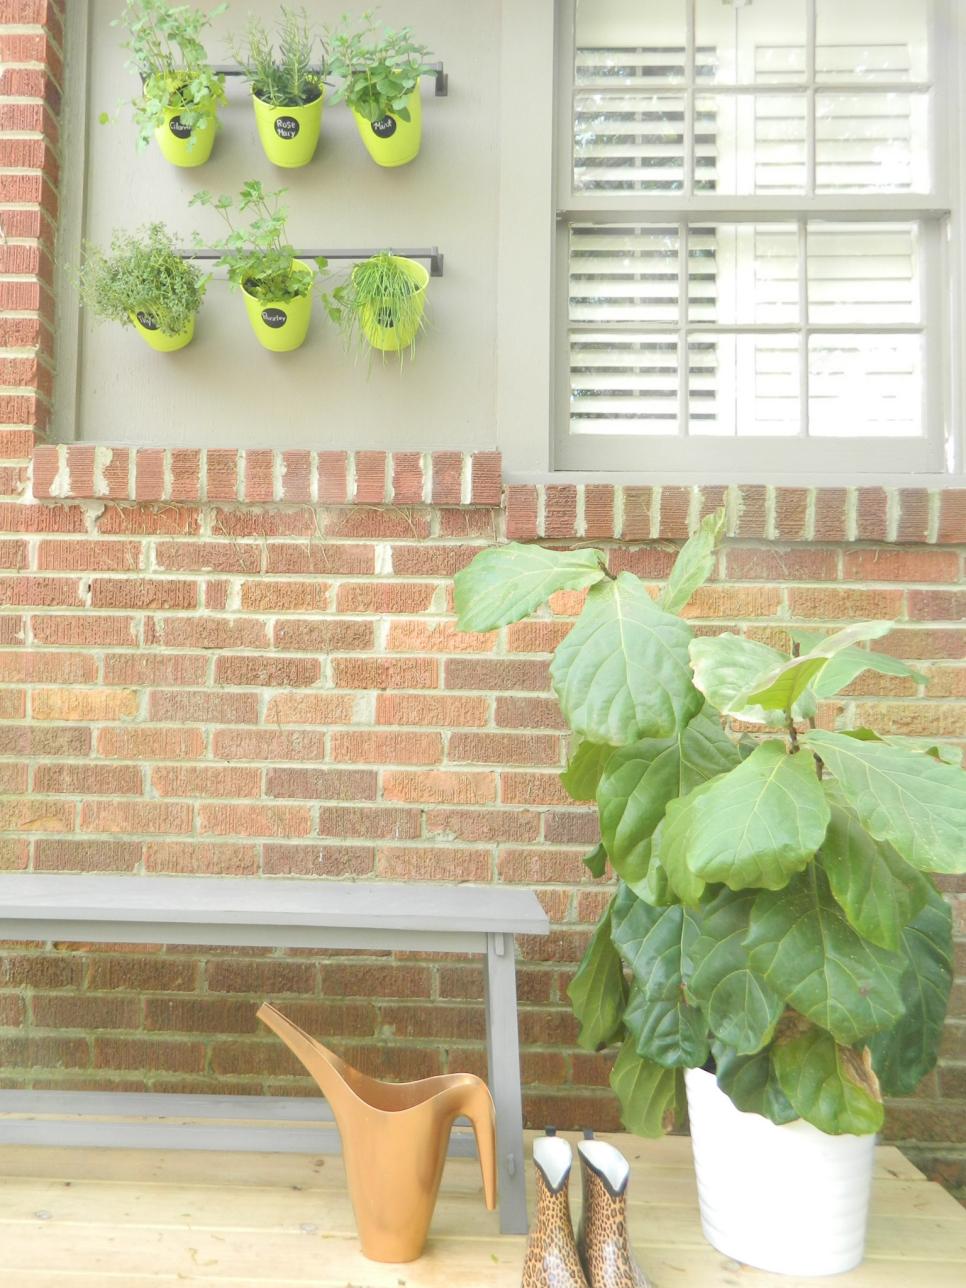 Patio with Hanging Plants and Brick Walls | HGTV